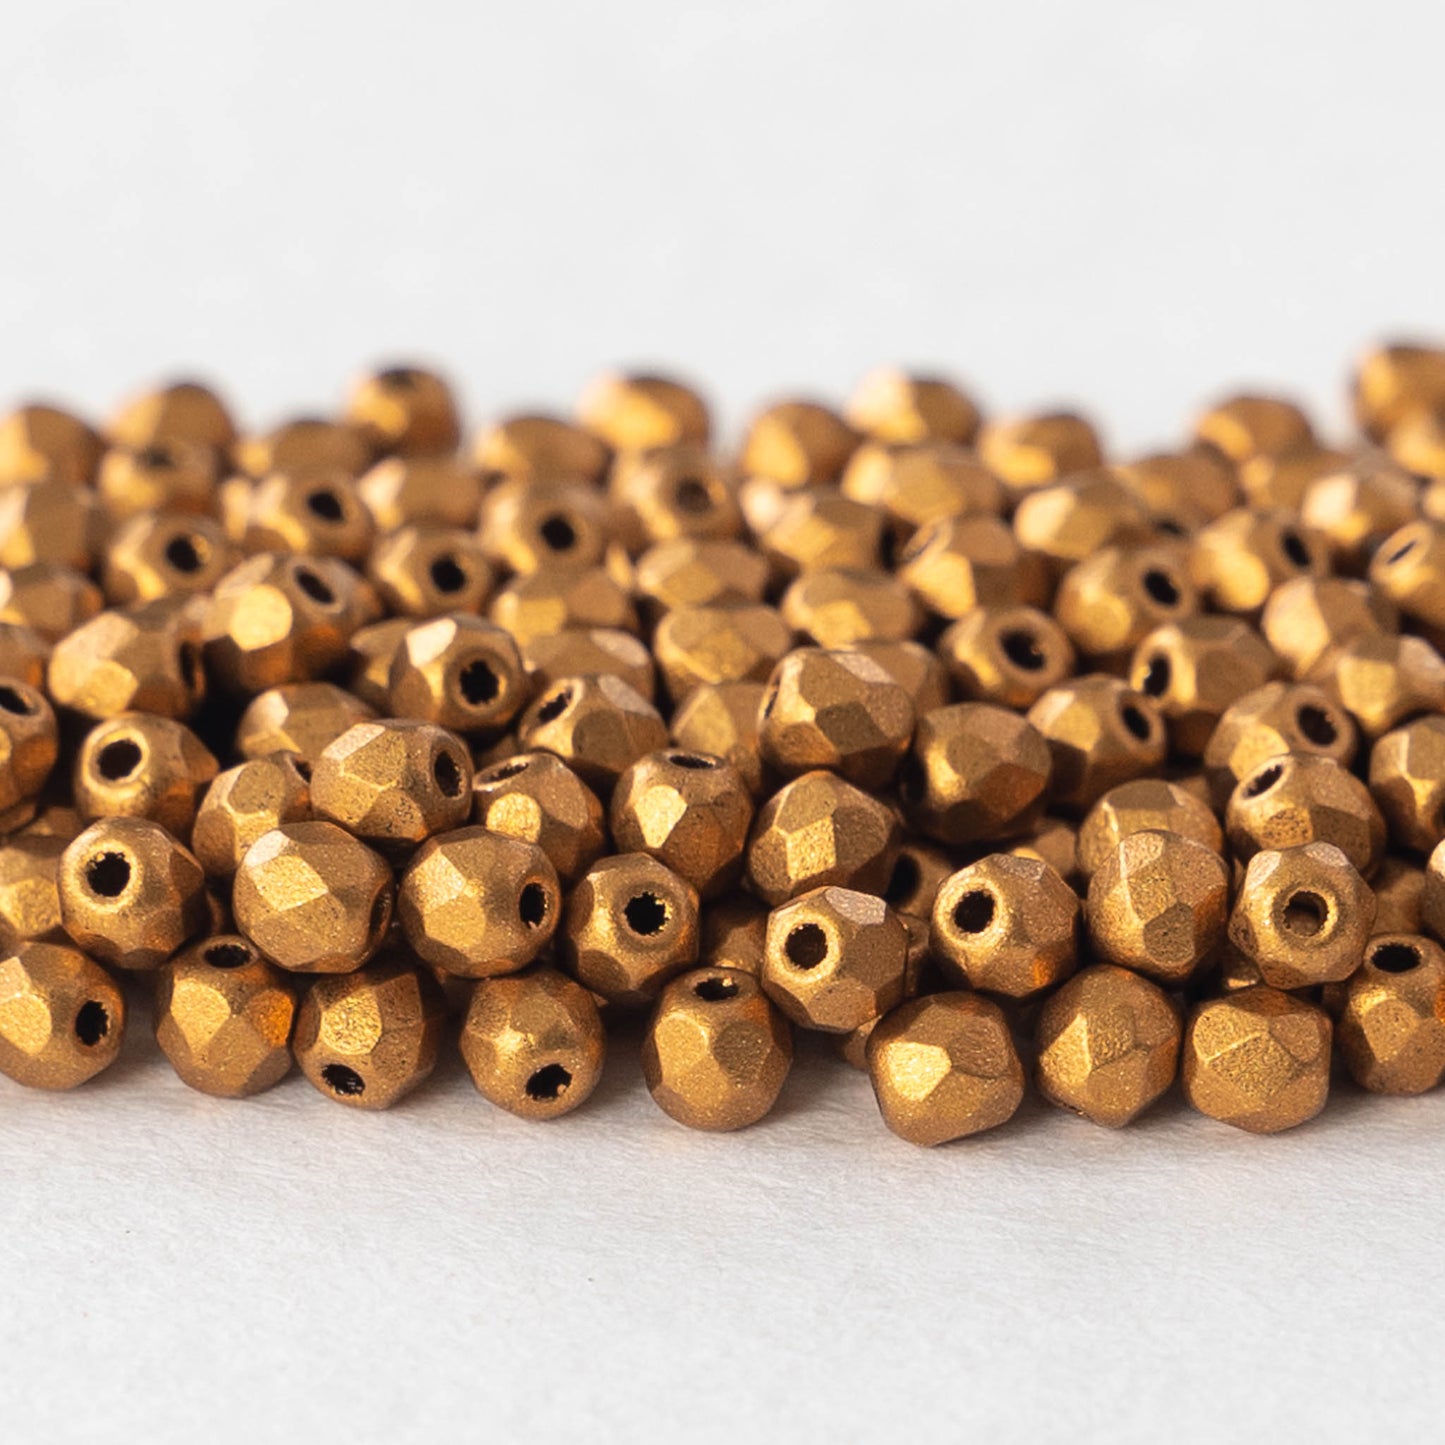 3mm Round Firepolished Beads - Antique Gold Matte - 5 Grams